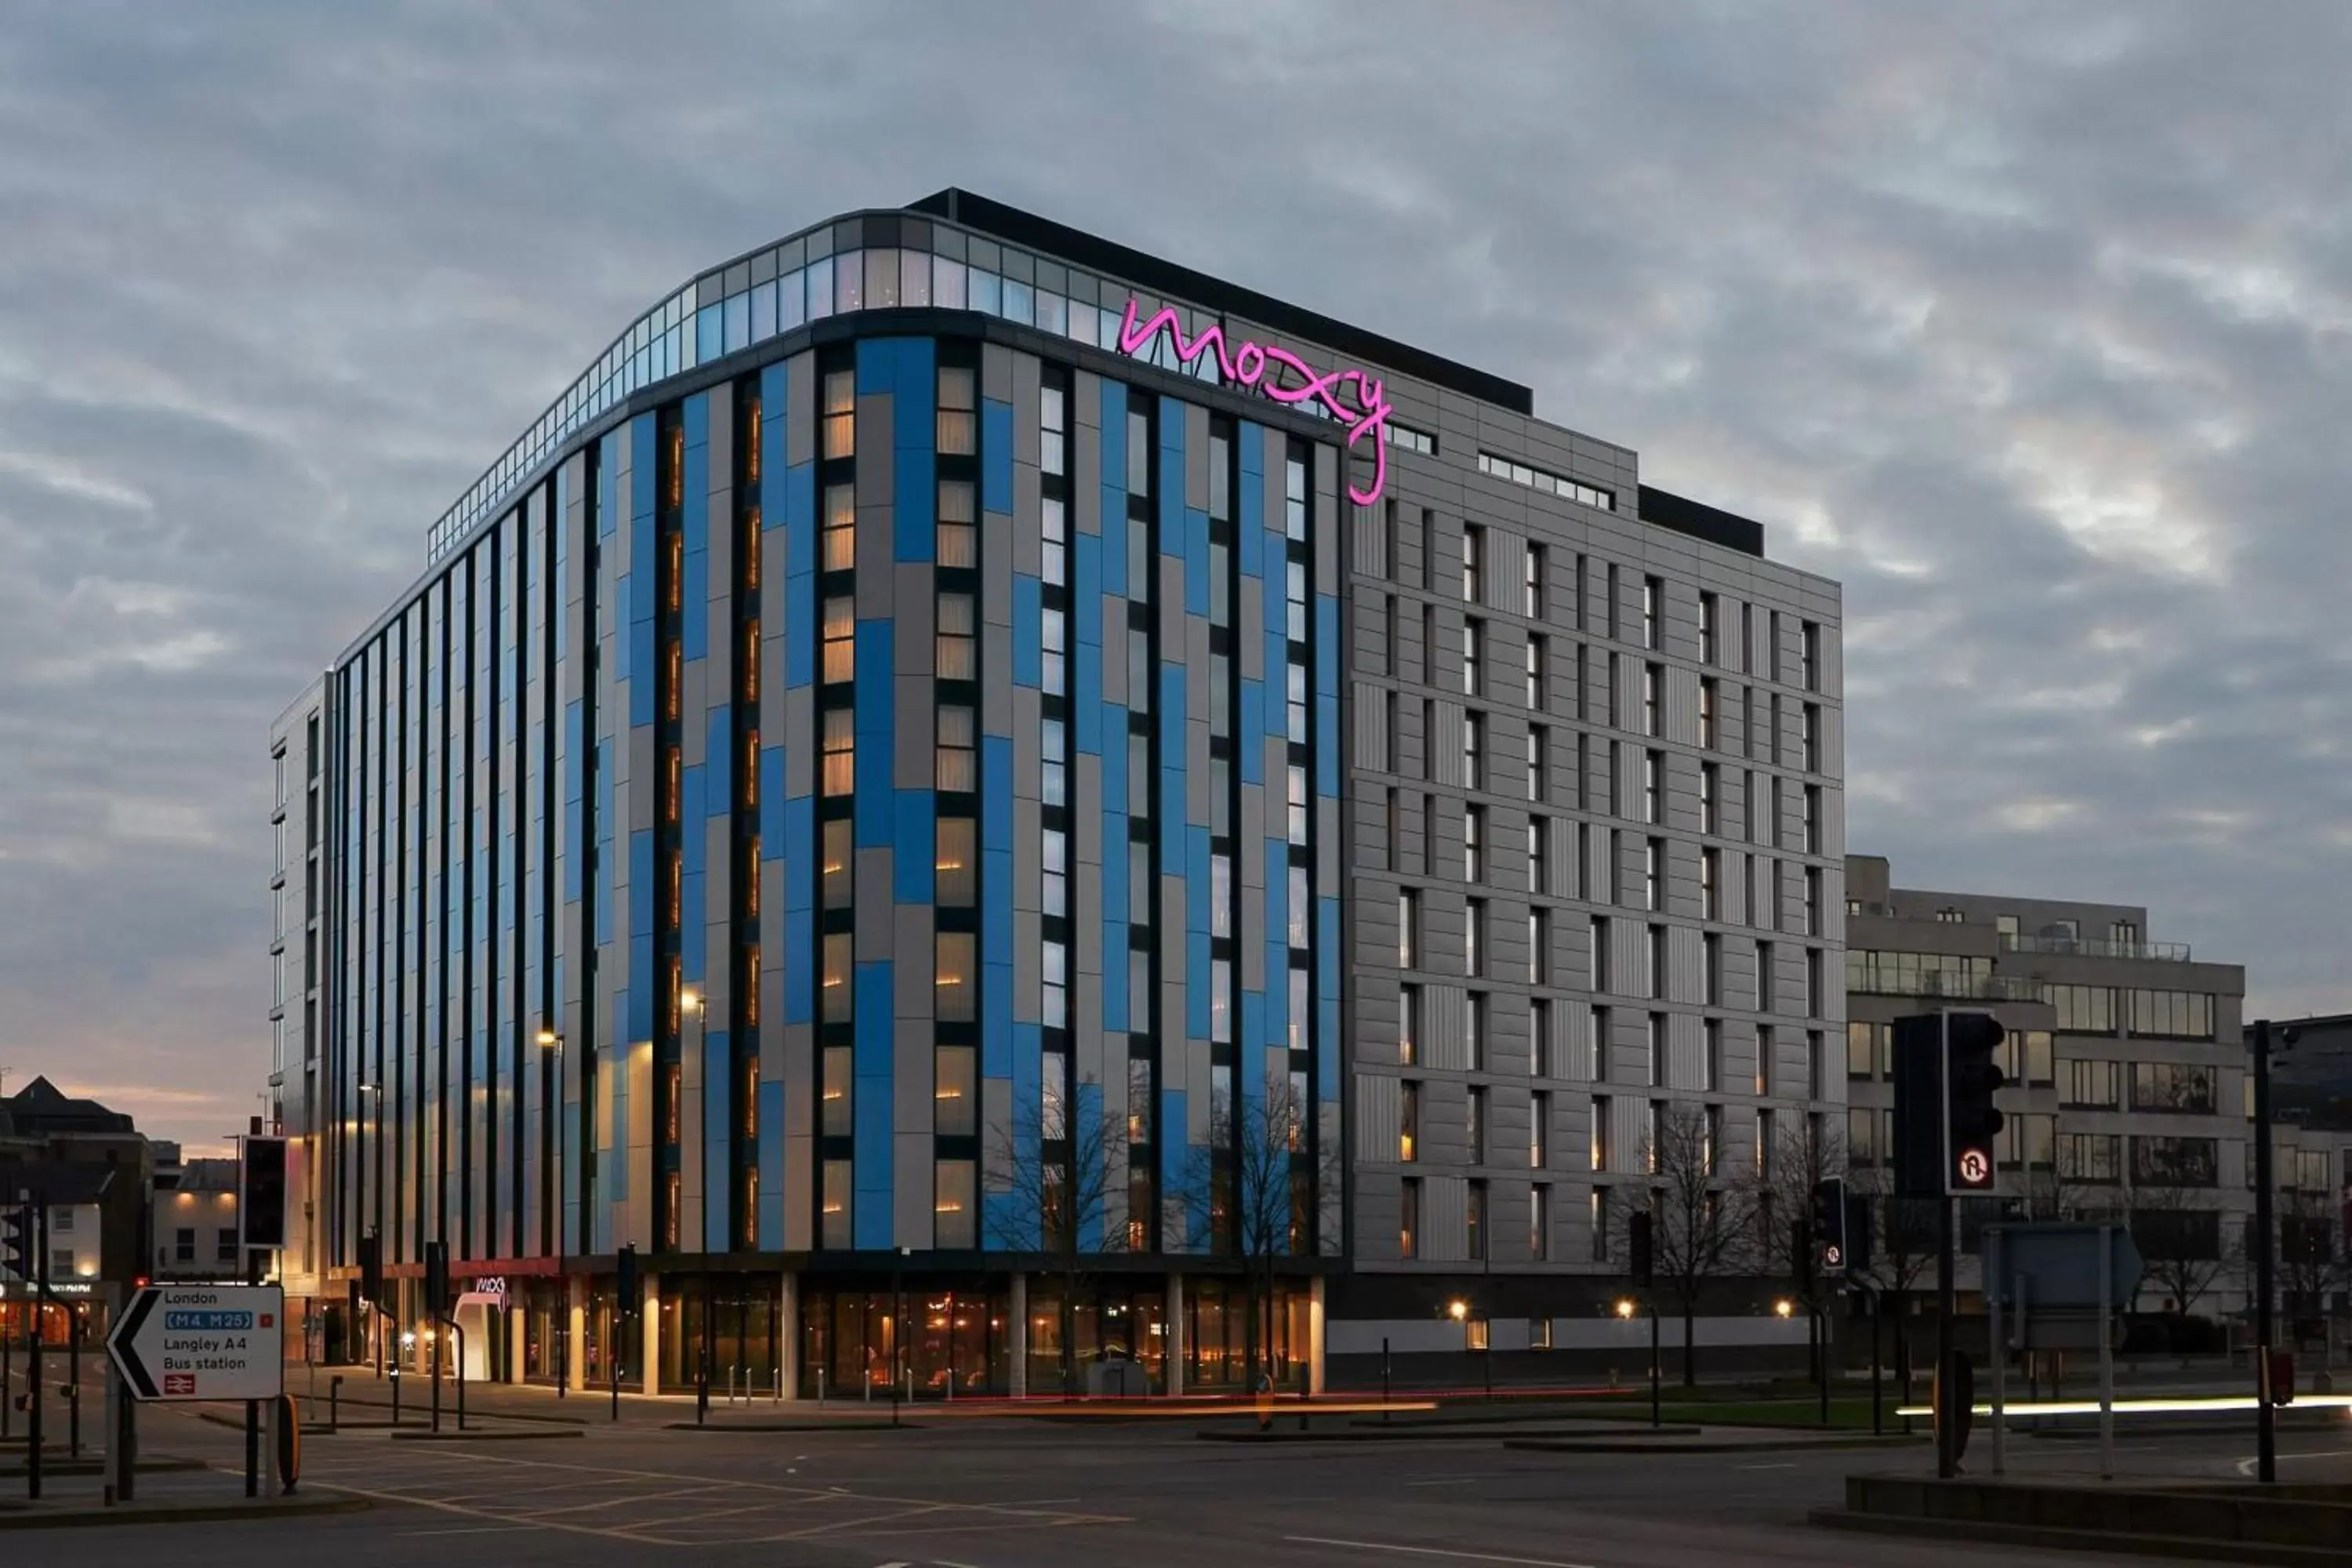 Property Building in Moxy Slough